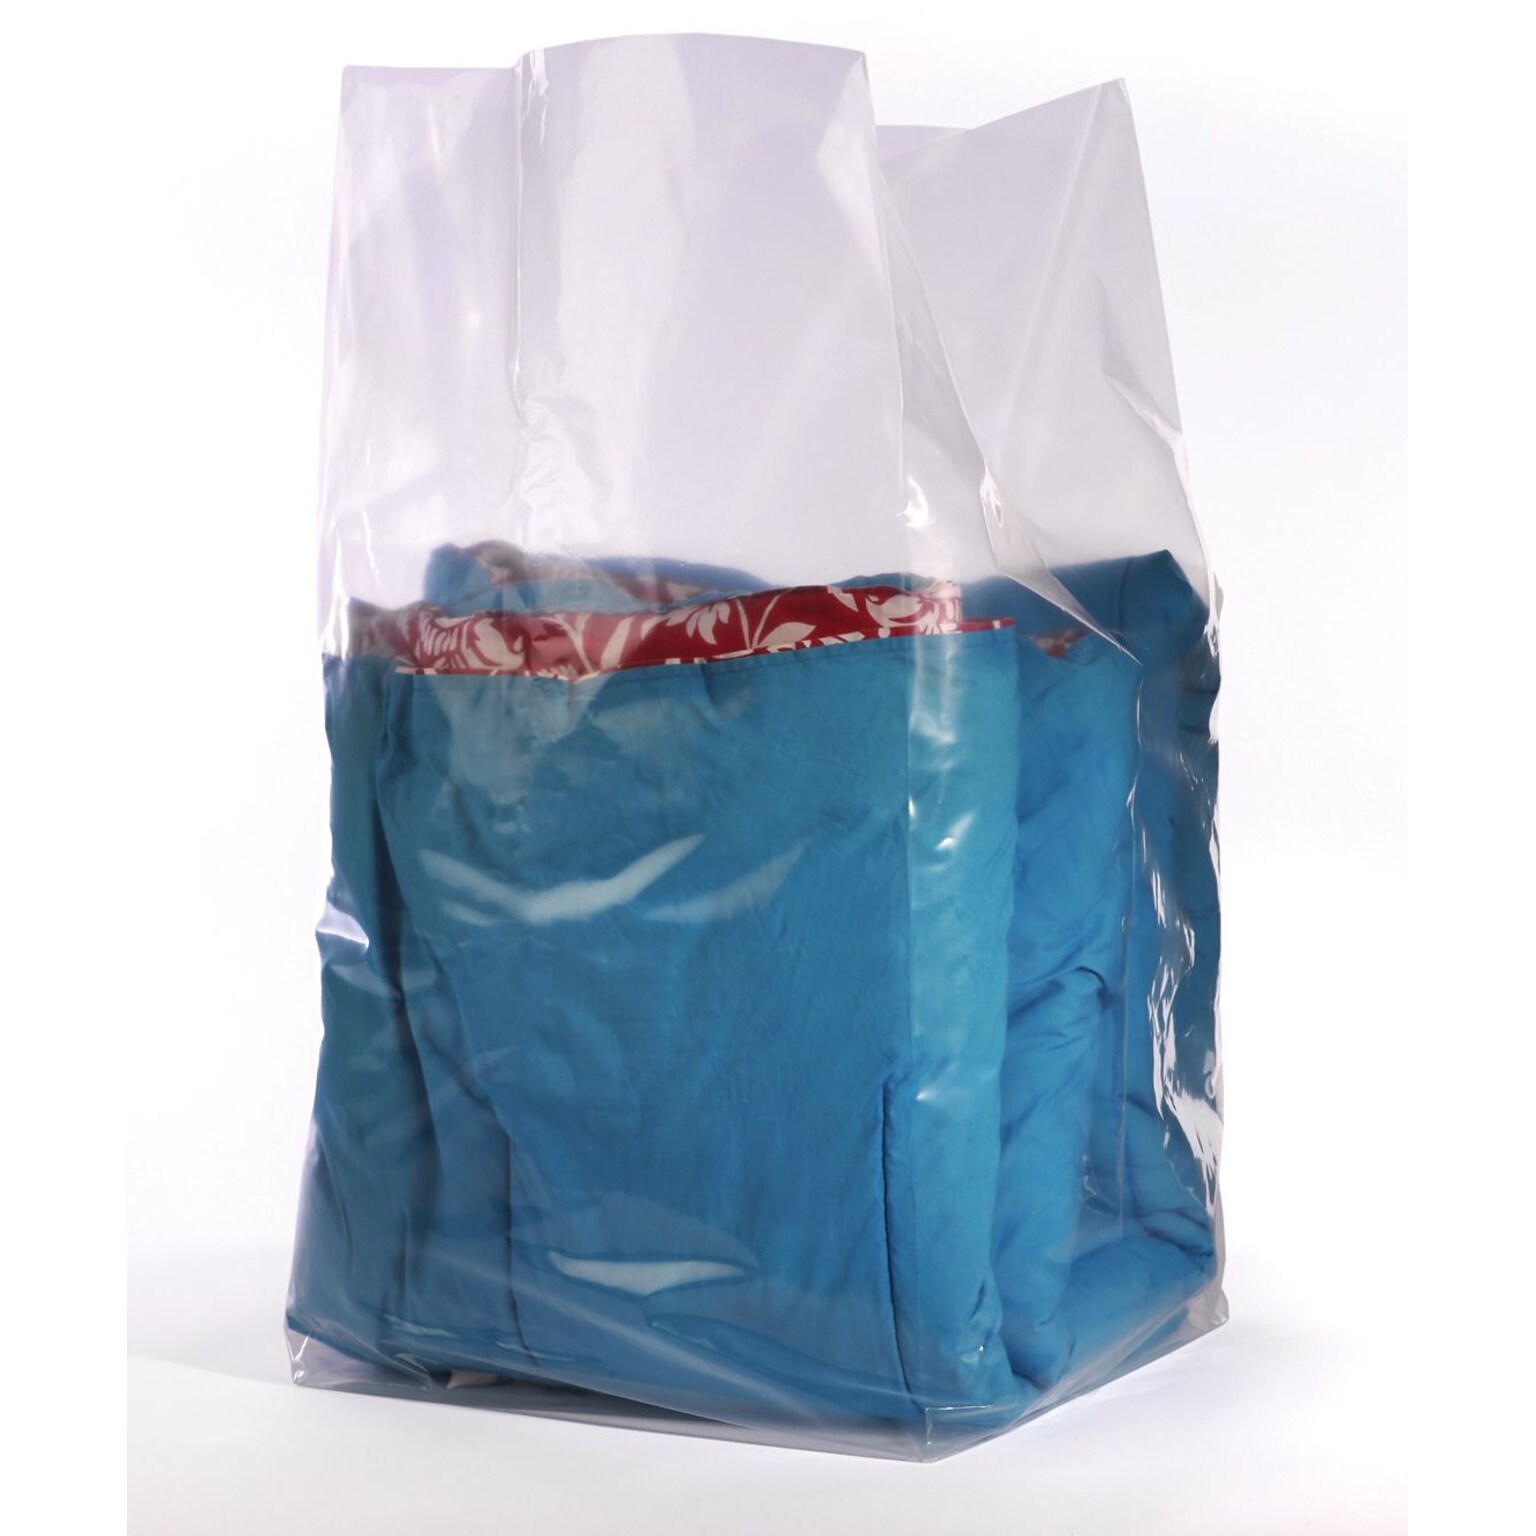 20 x 10 x 36 Gusseted Poly Bags, 2 Mil, Clear, 250/Carton (1622)